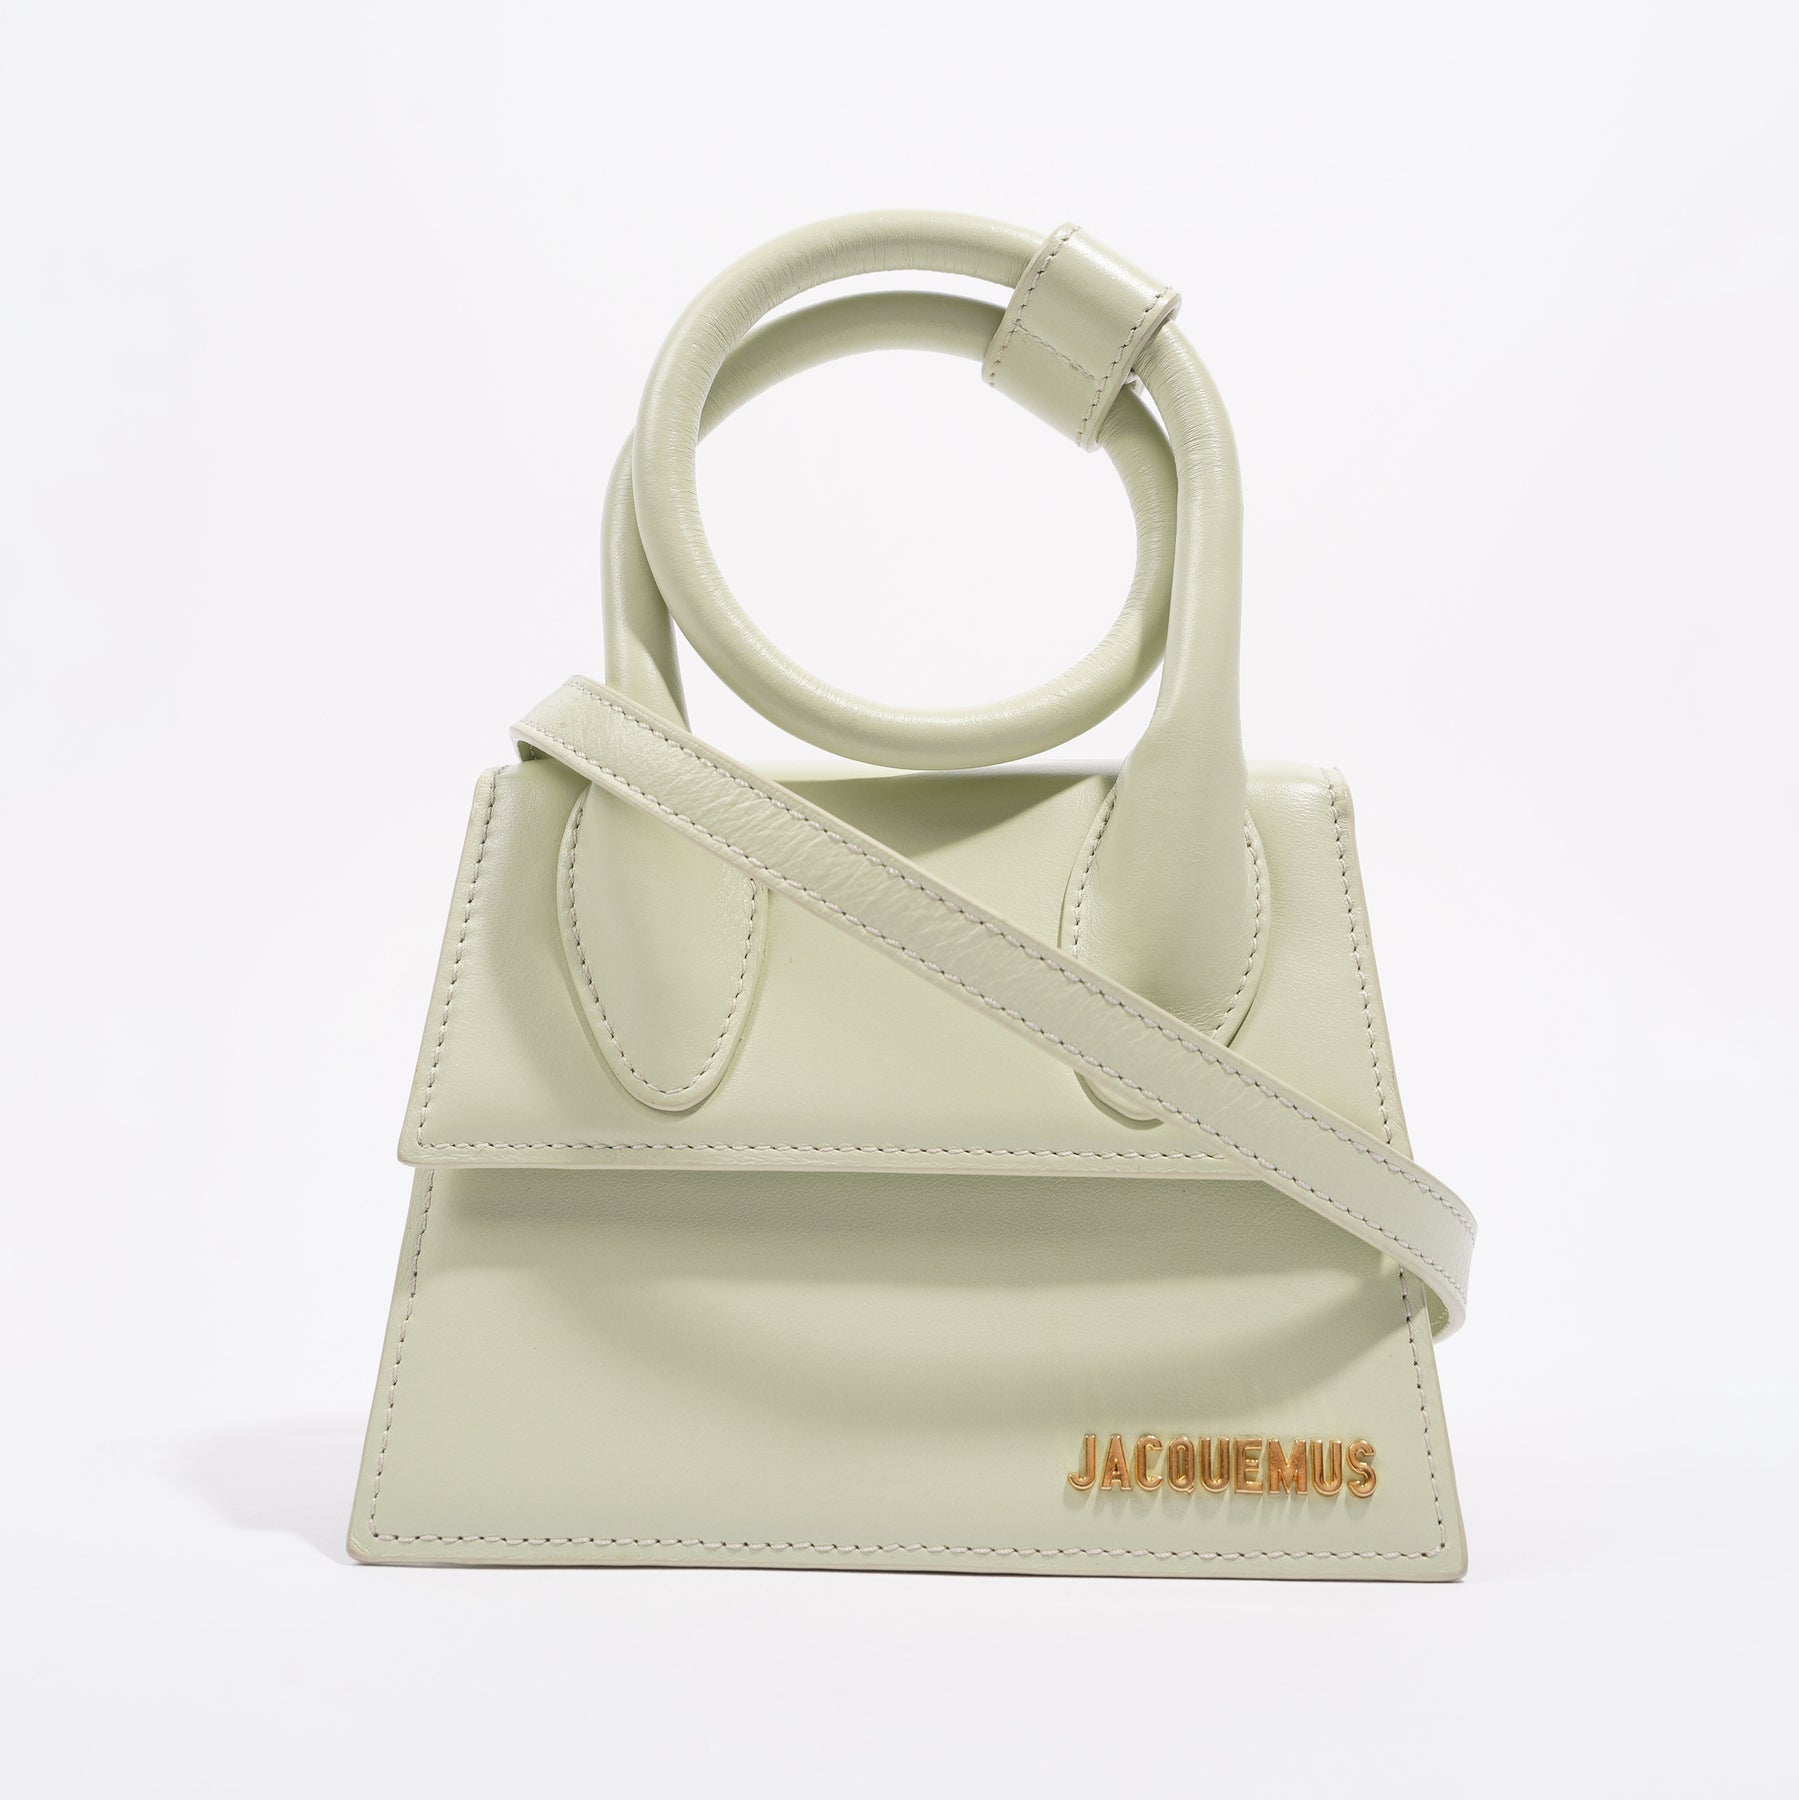 Jacquemus Le Chiquito Noeud Leather Shoulder Bag in Natural